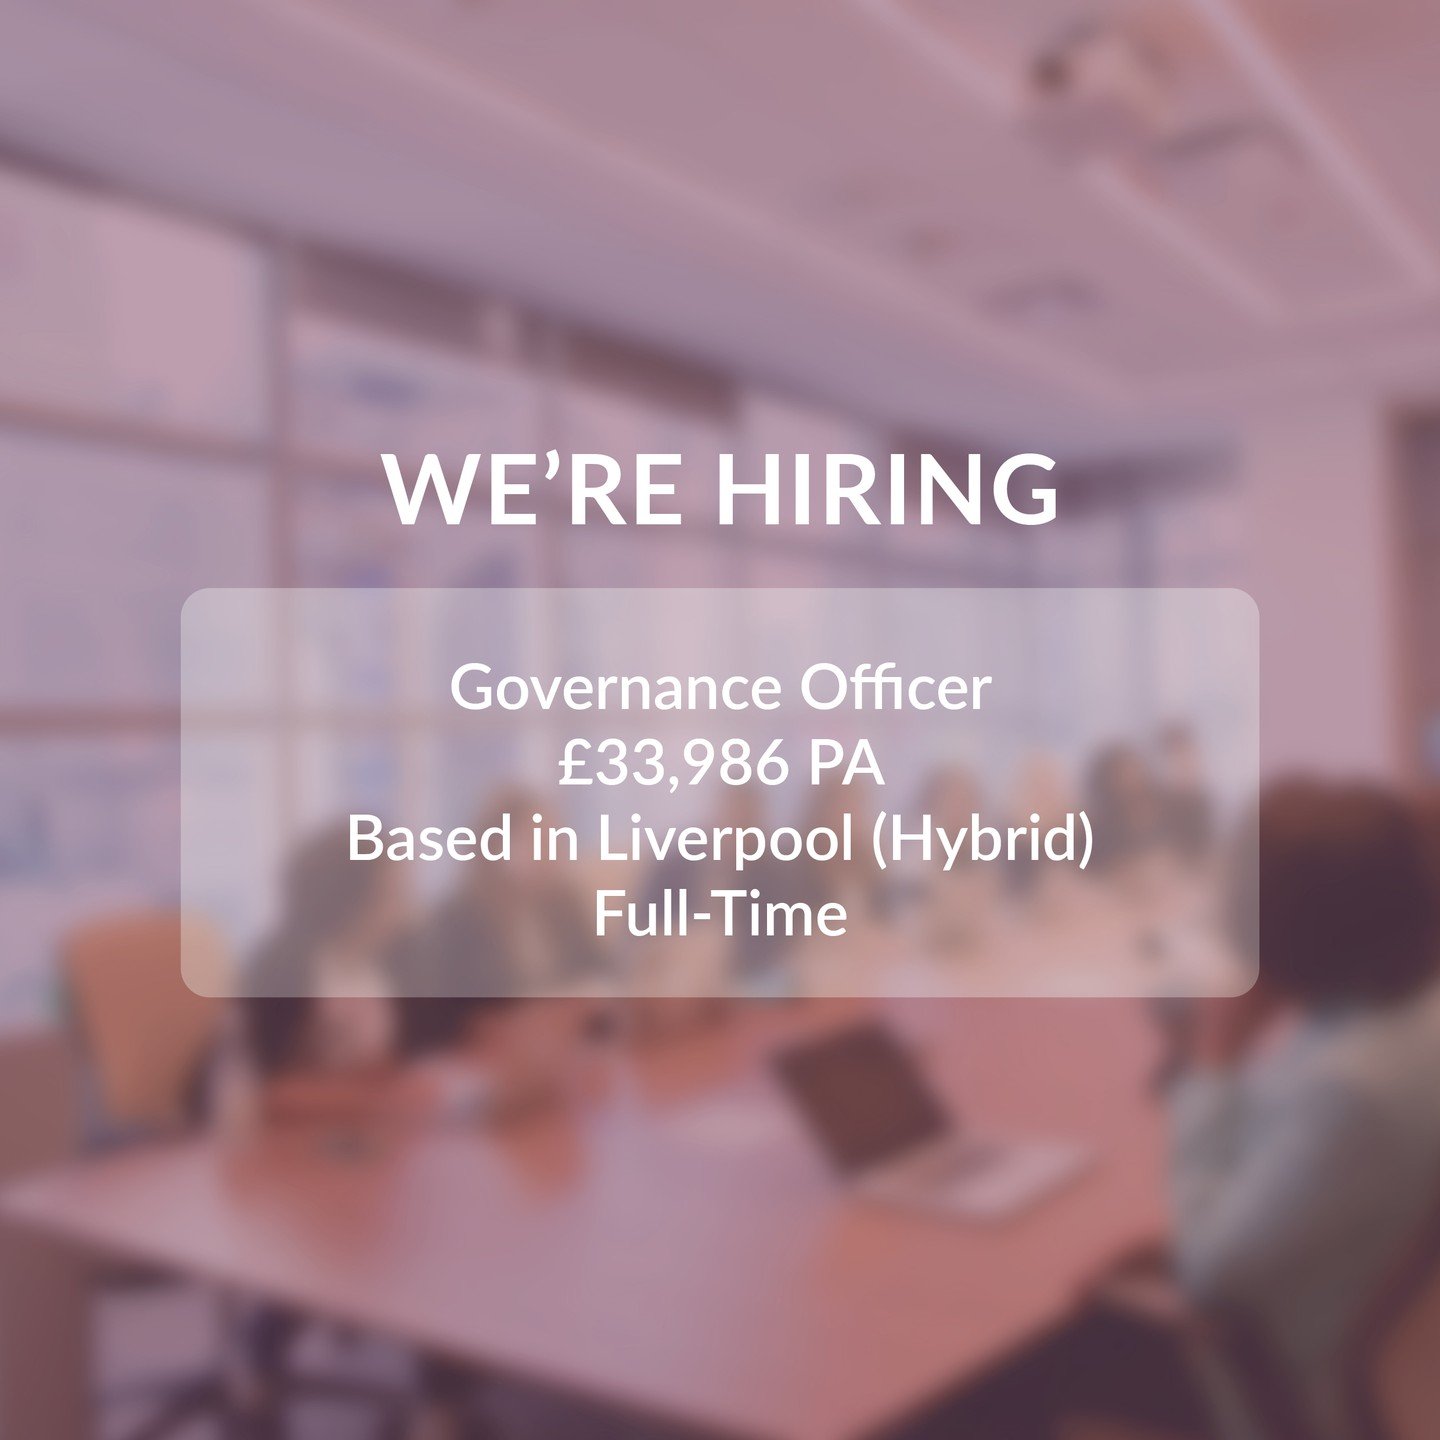 We're Hiring | Governance Officer 📢

As a Governance Officer, you will provide an effective governance and secretariat service, supporting the organisation in decision-making and ensuring governance-related regulatory compliance.

Find out more usin